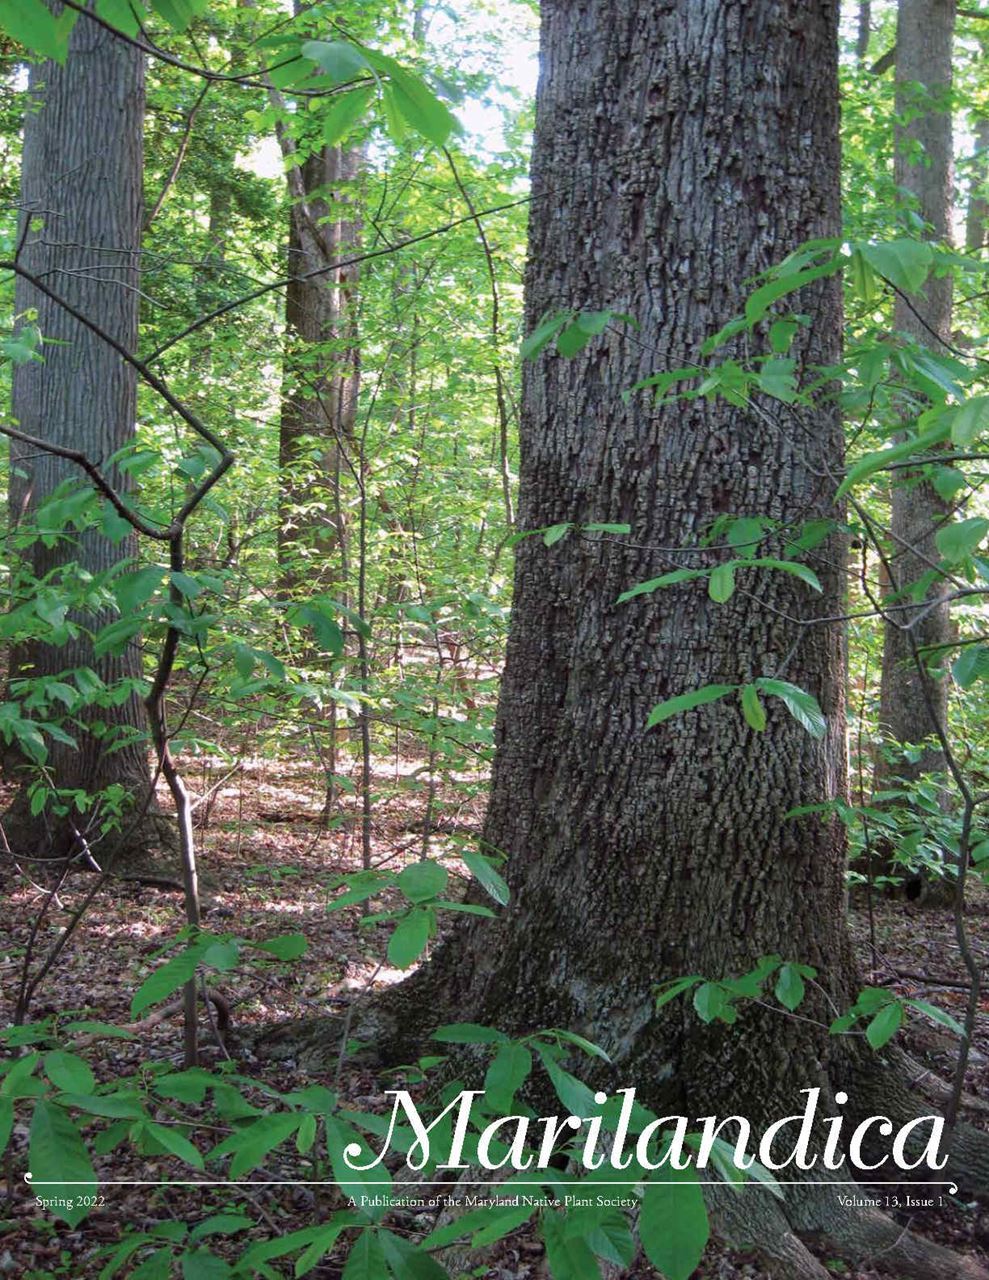 Marilandica Cover Image of Ancient Fraxinus americana grove at Chapman Shell-Marl Ravine Forest. Photo: R.H. Simmons